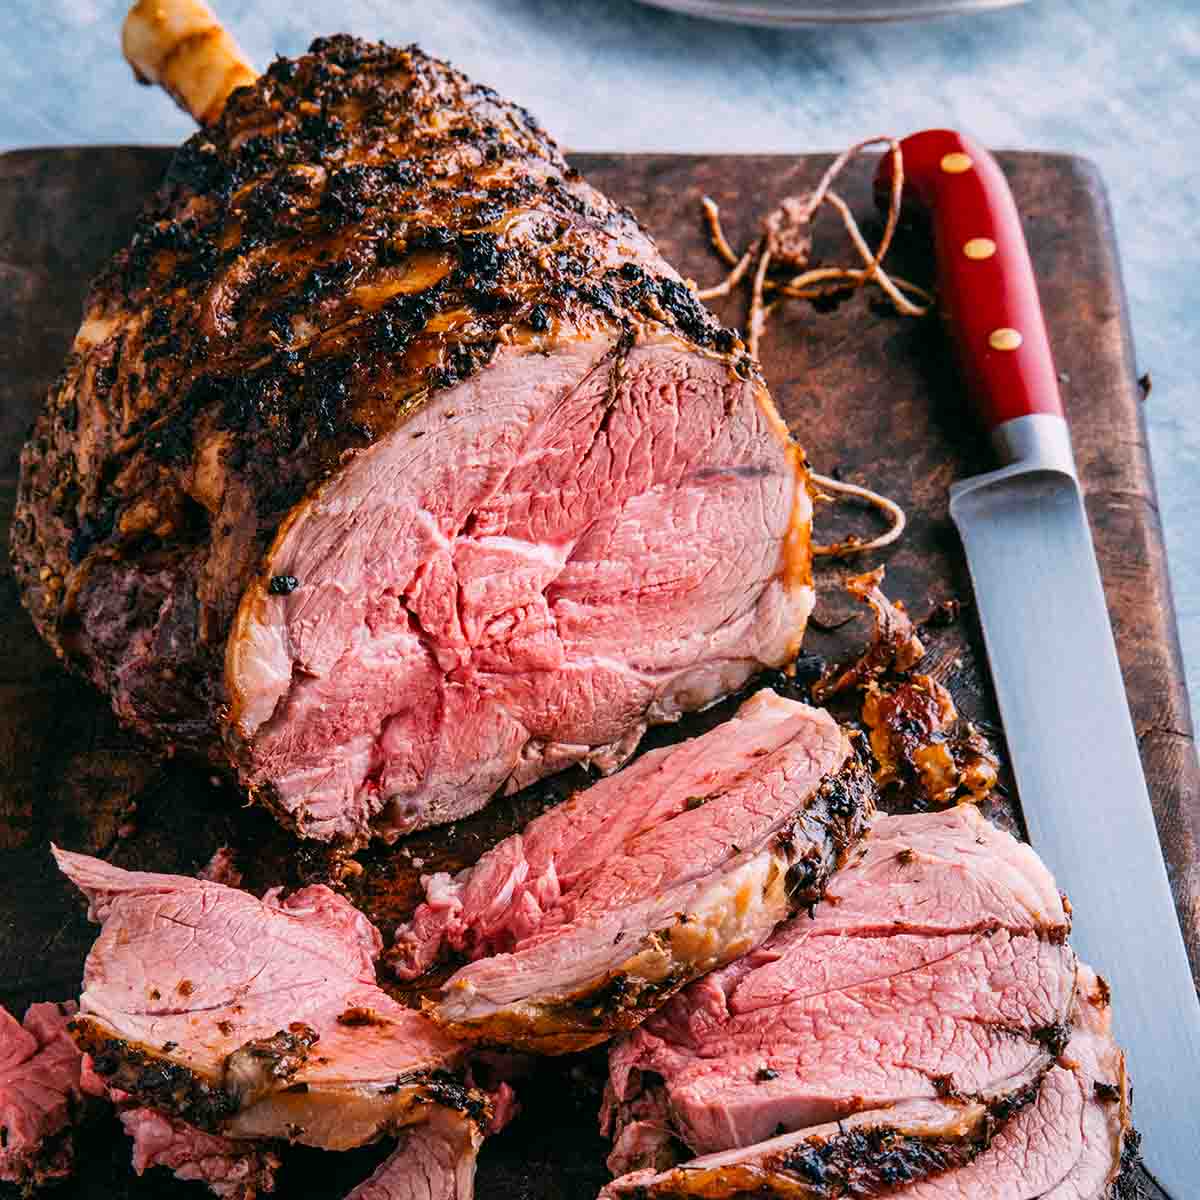 A partially carved leg of lamb on a wooden cutting board.